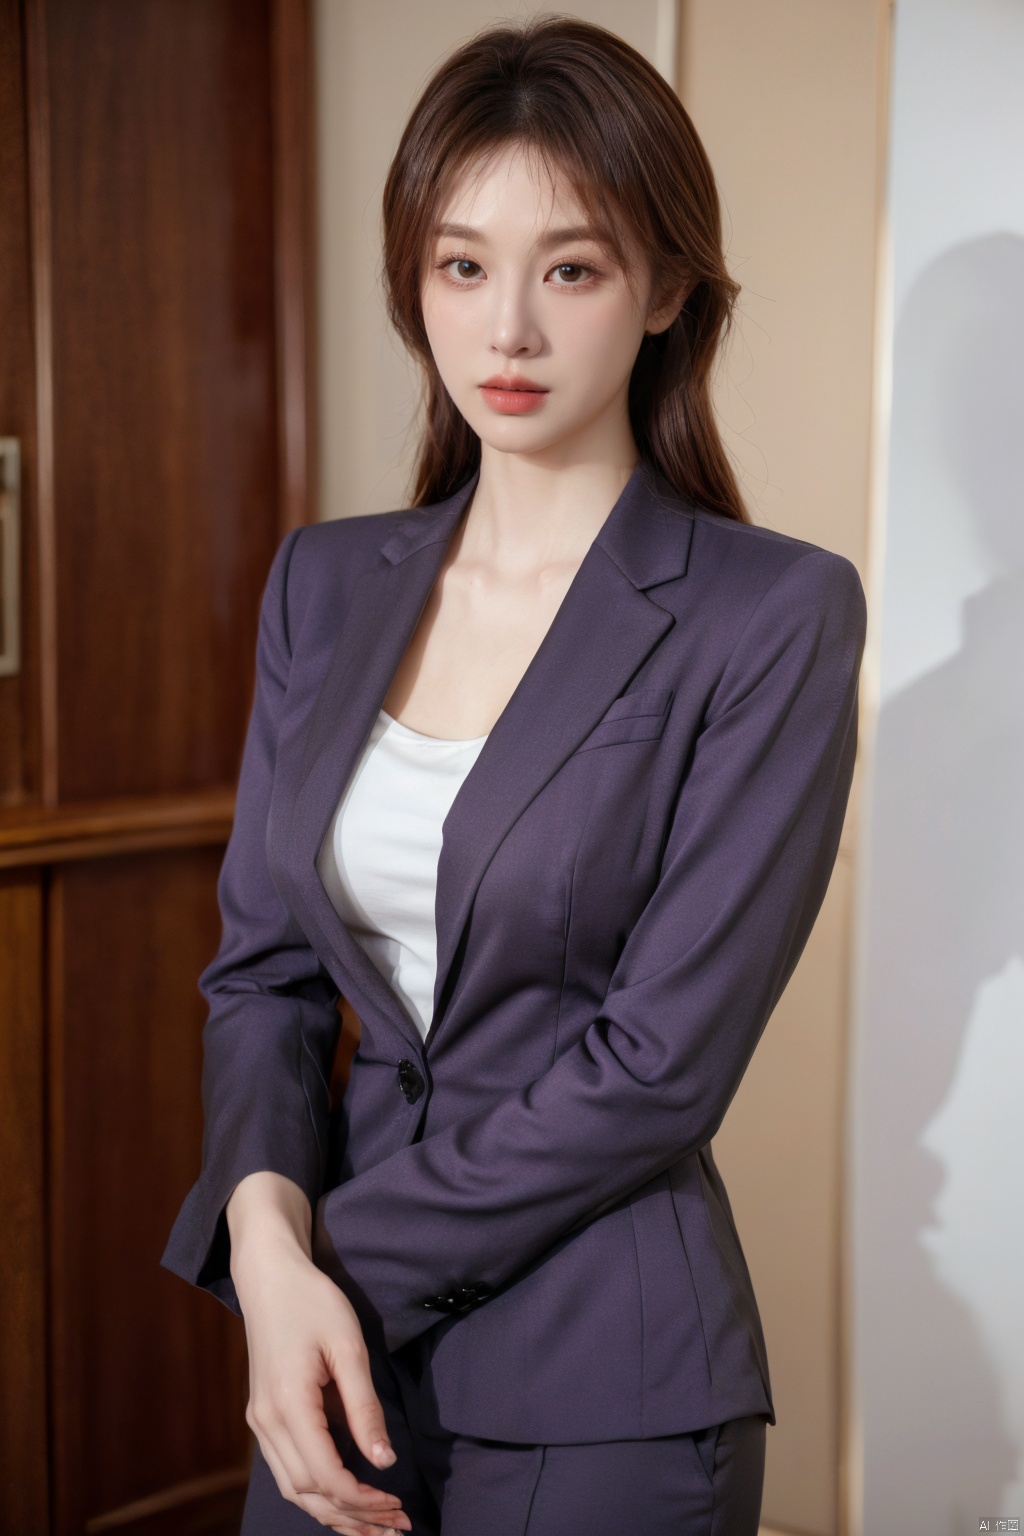  Xlongni,1Girl, suit, (photo reality: 1.3) , Edge lighting, (high detail skin: 1.2) , 8K Ultra HD, high quality, high resolution, (photo reality: 1.3) , (wear a purple suit jacket, white shirt inside:1.29), large breasts, high-grade feeling, texture pull full, 1 girl,Xlongni,(big_breasts:1.39)